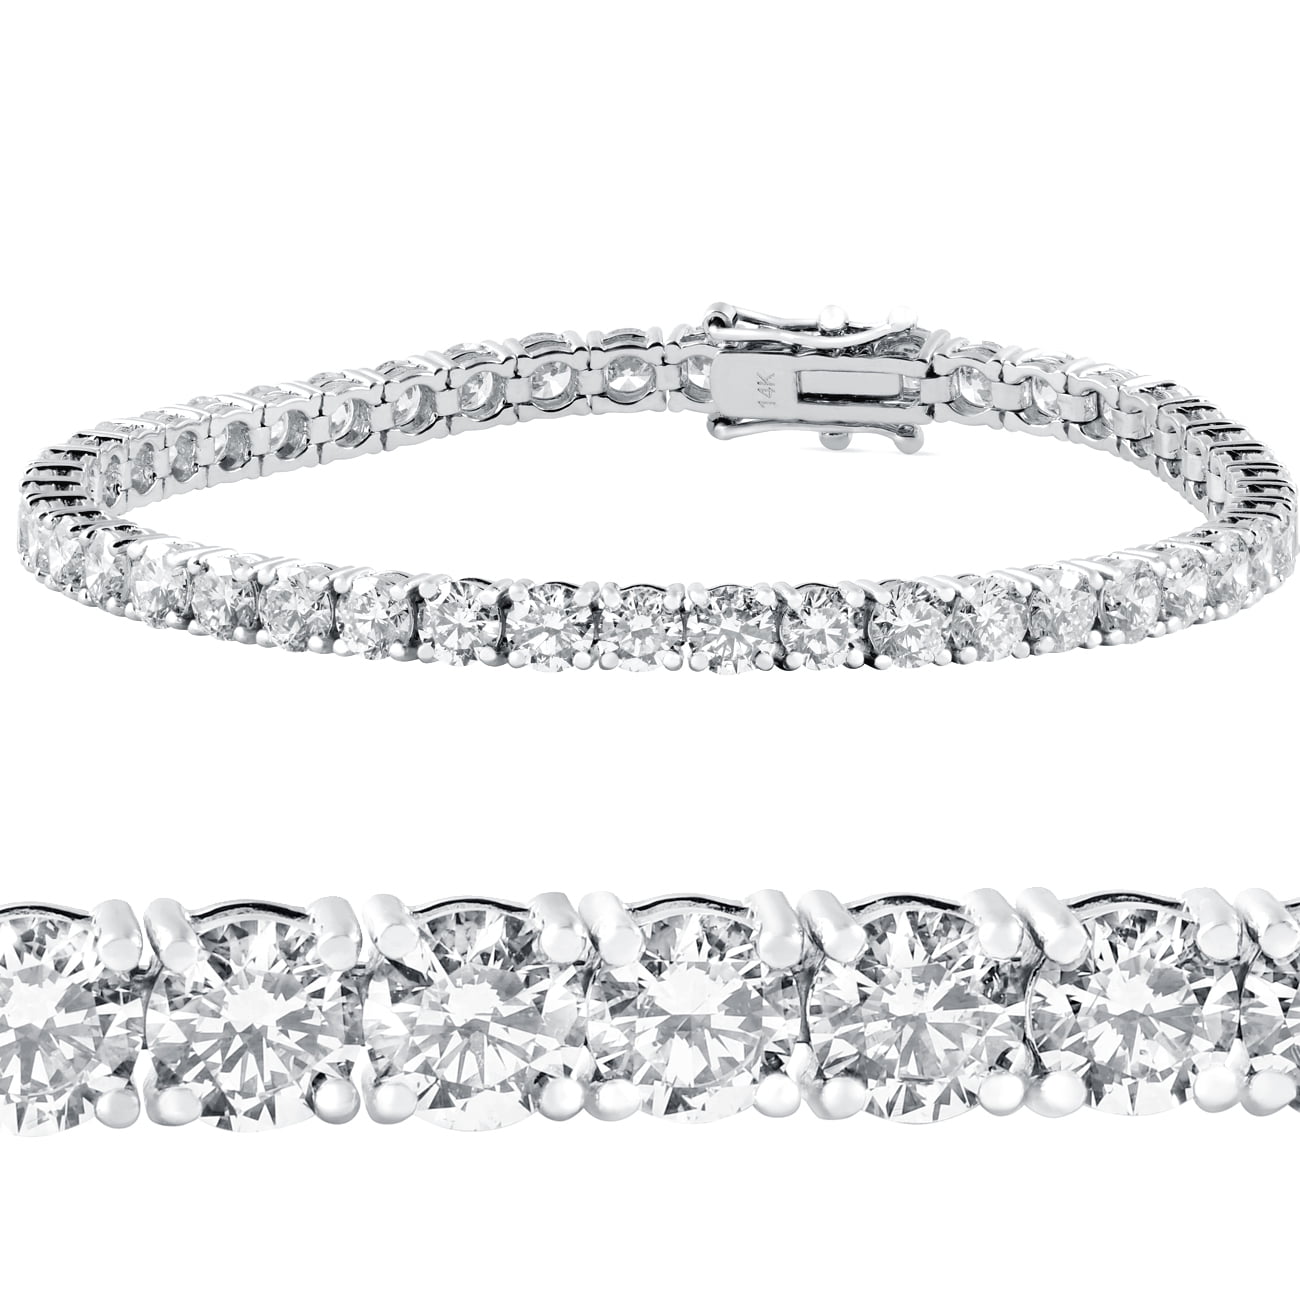 6.25Ct Round Cut Diamond Tennis Bracelets For Women's In 14K Two Tone Gold Over